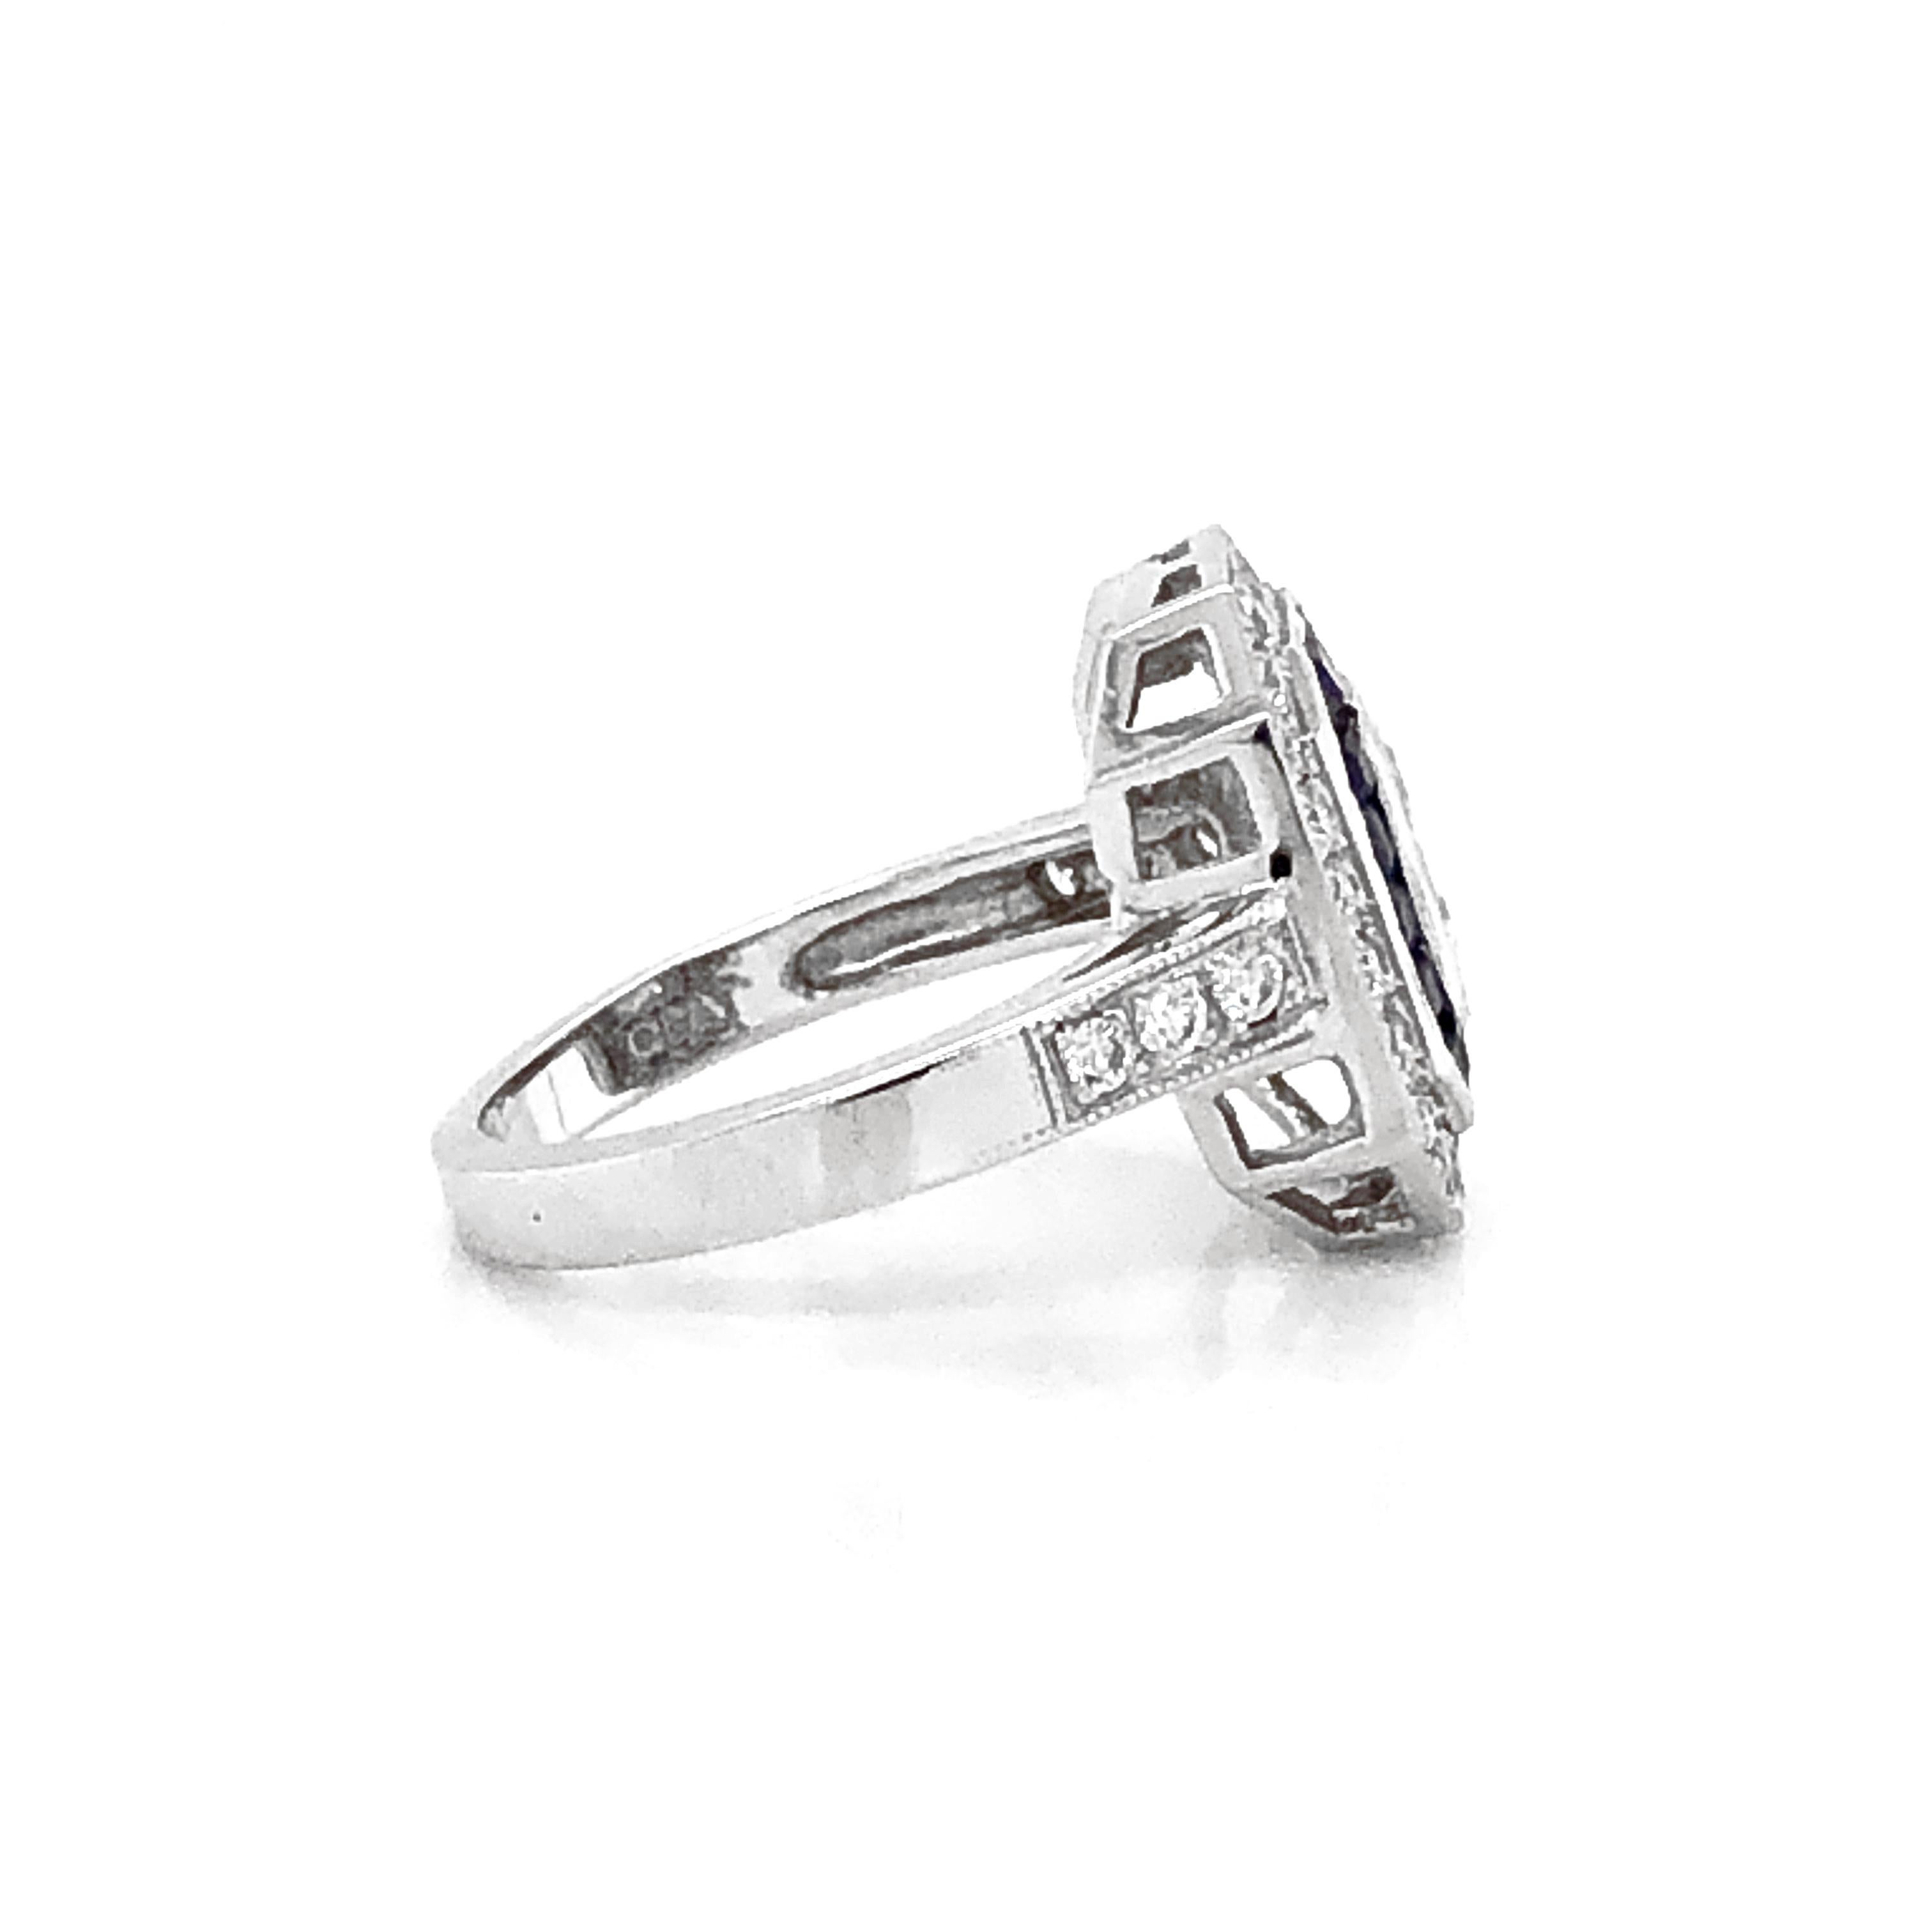 Contemporary GIA Certified Emerald Cut Diamond 1.01 Carat Sapphires Diamonds Cocktail Ring For Sale